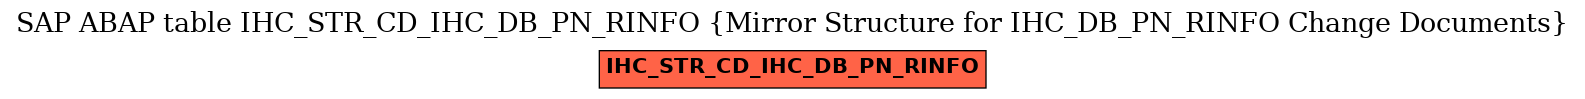 E-R Diagram for table IHC_STR_CD_IHC_DB_PN_RINFO (Mirror Structure for IHC_DB_PN_RINFO Change Documents)